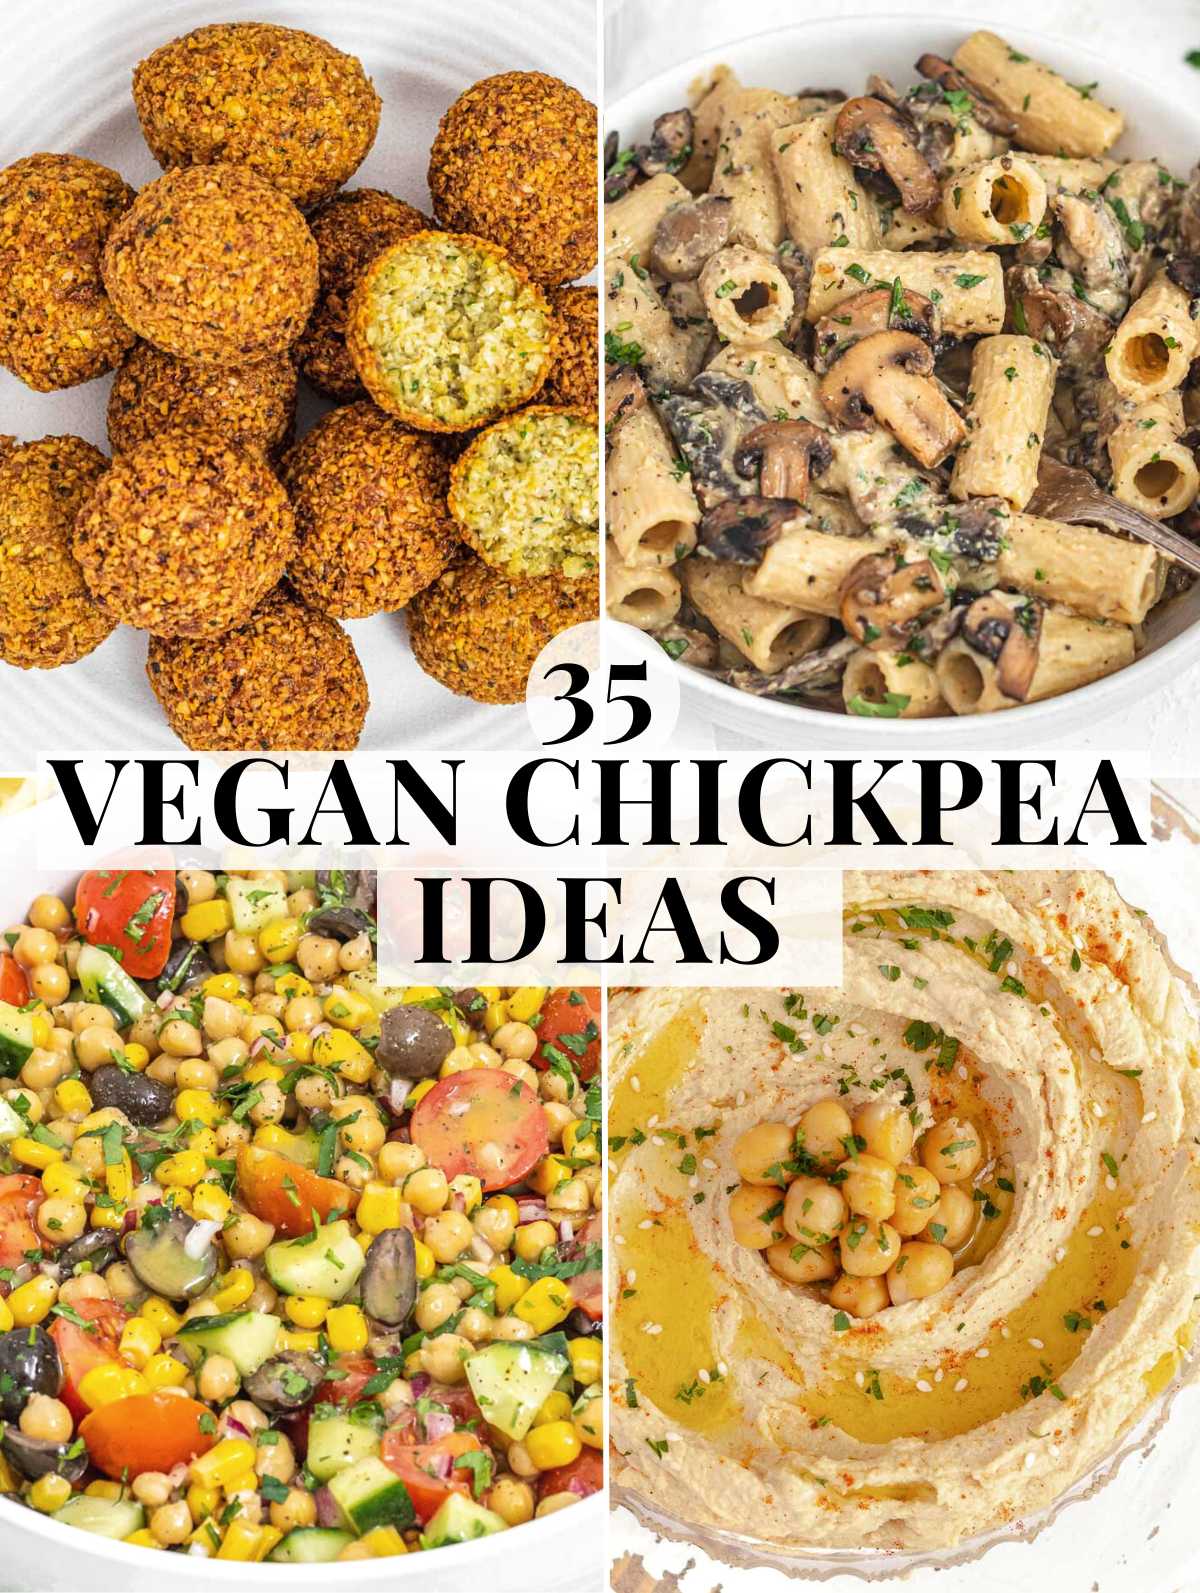 Vegan Chickpea Recipes with mains and starters